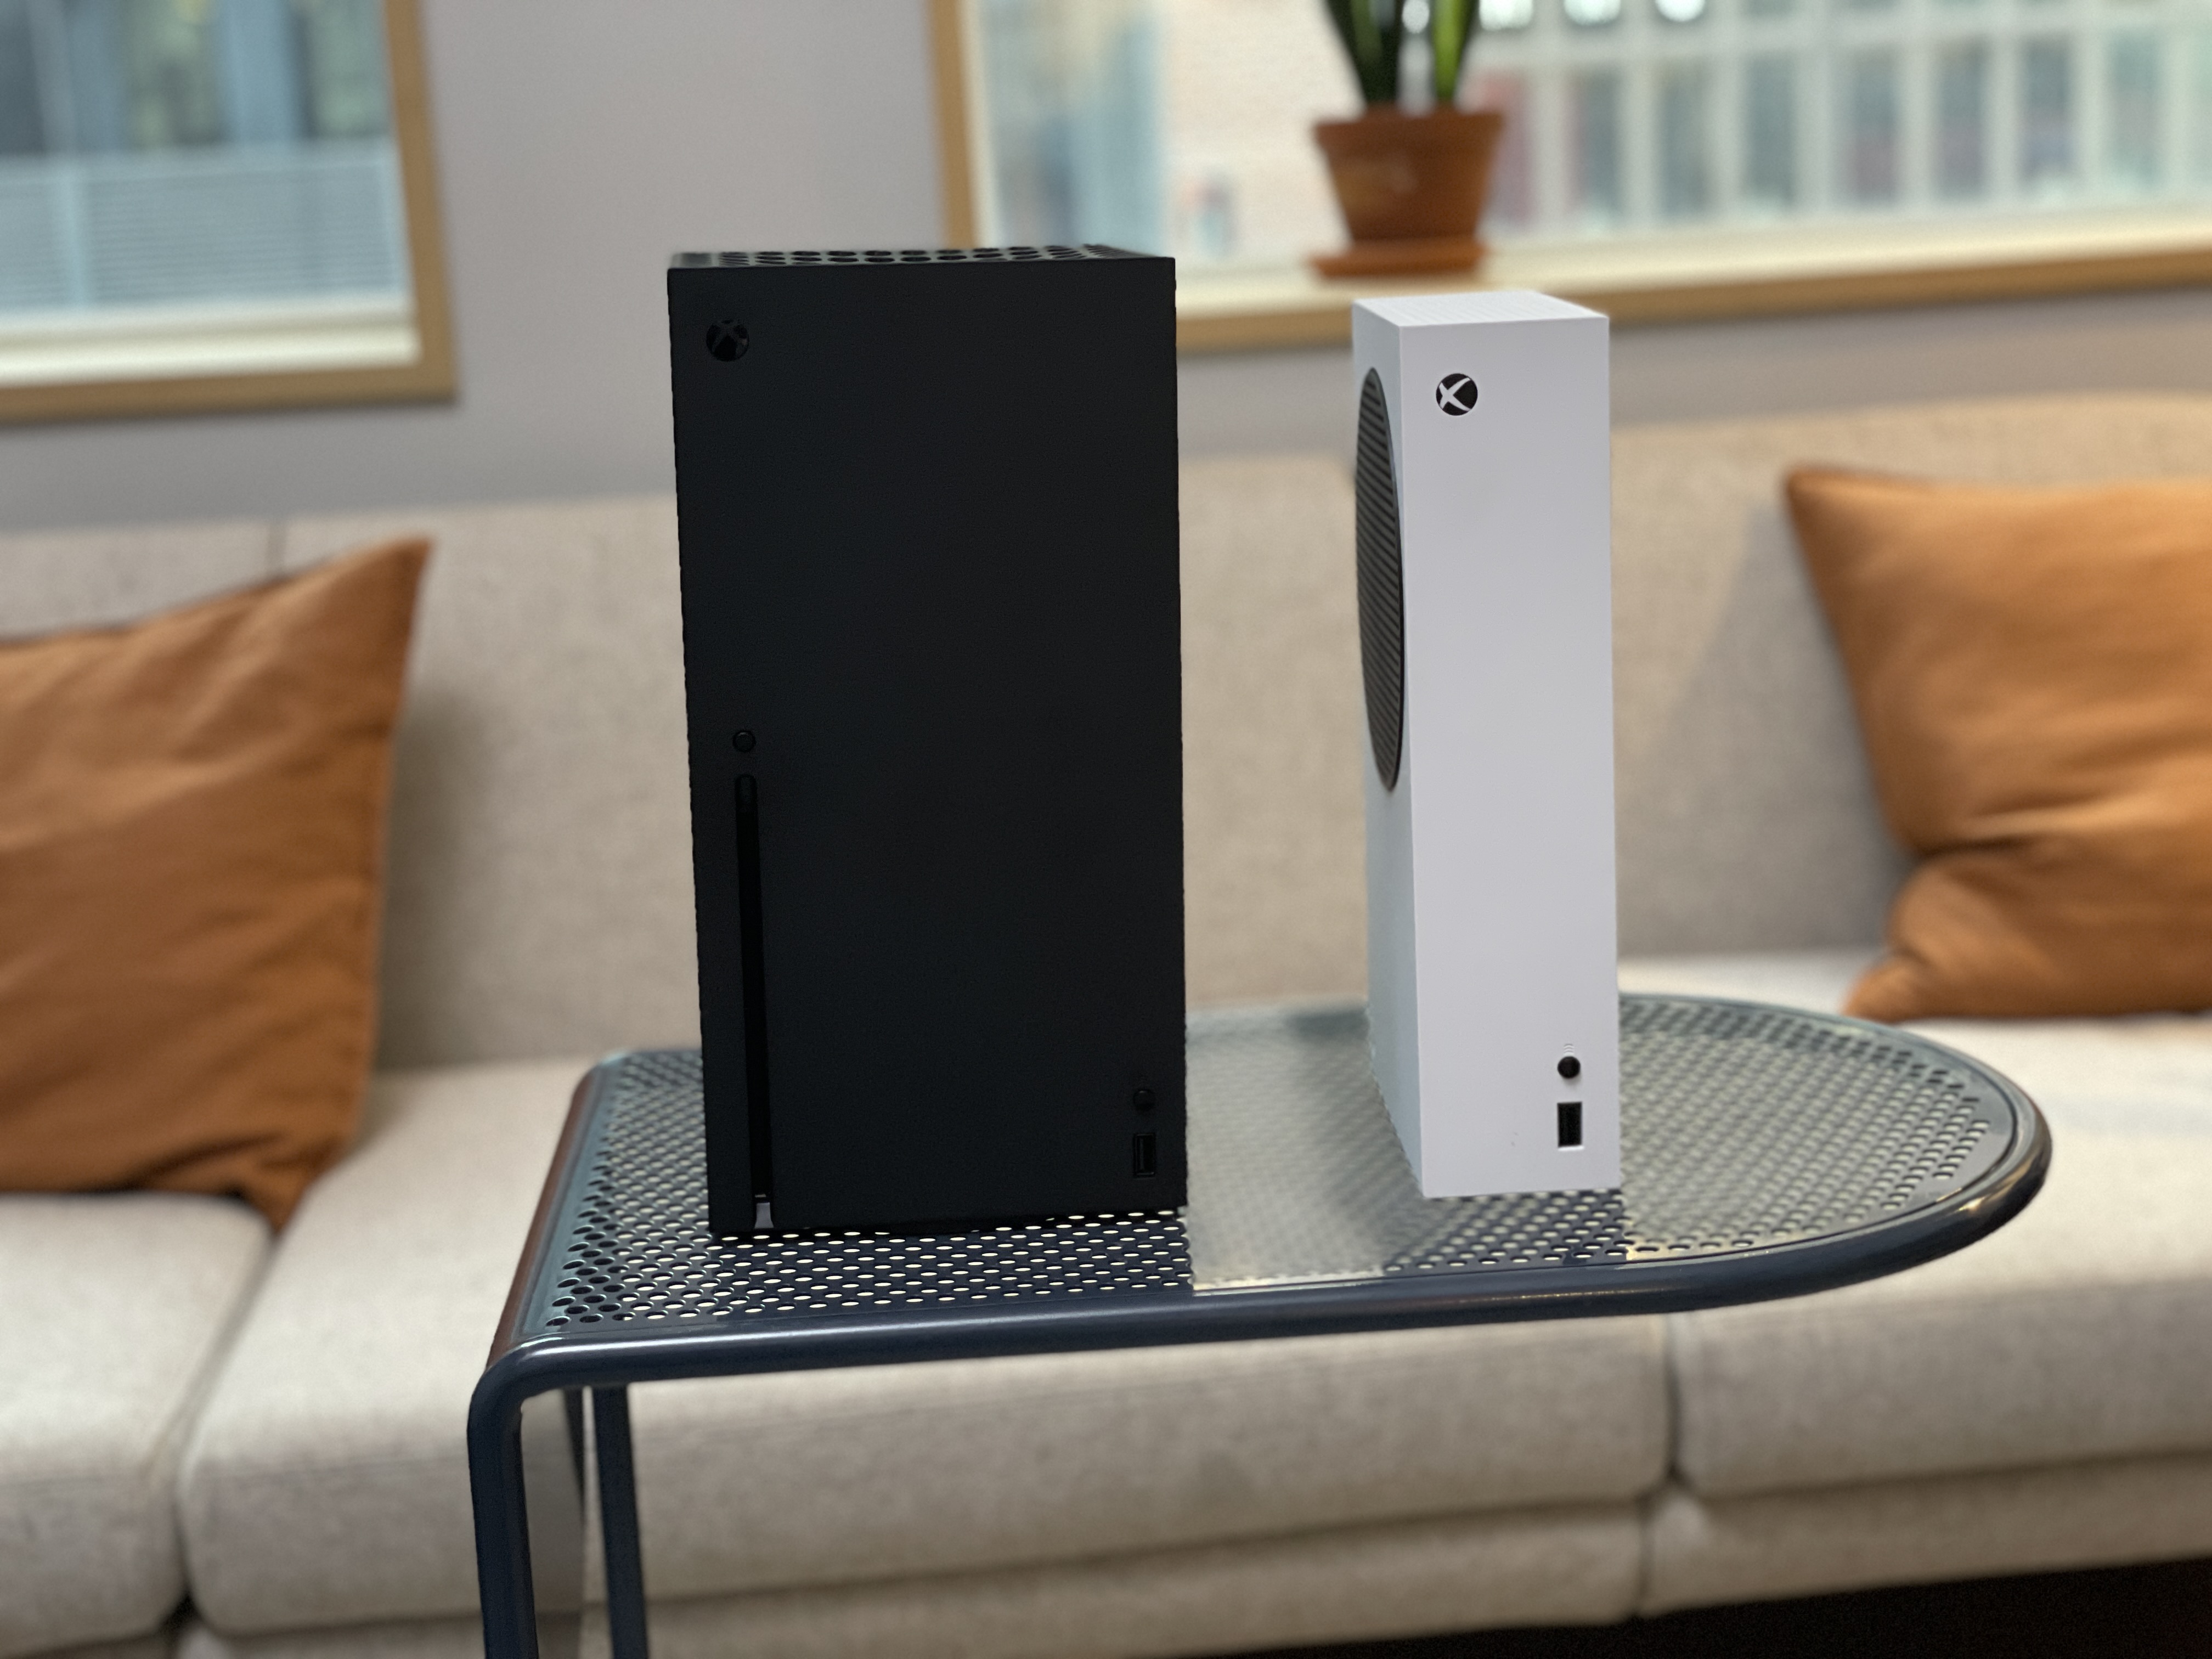 which is newer xbox s or x